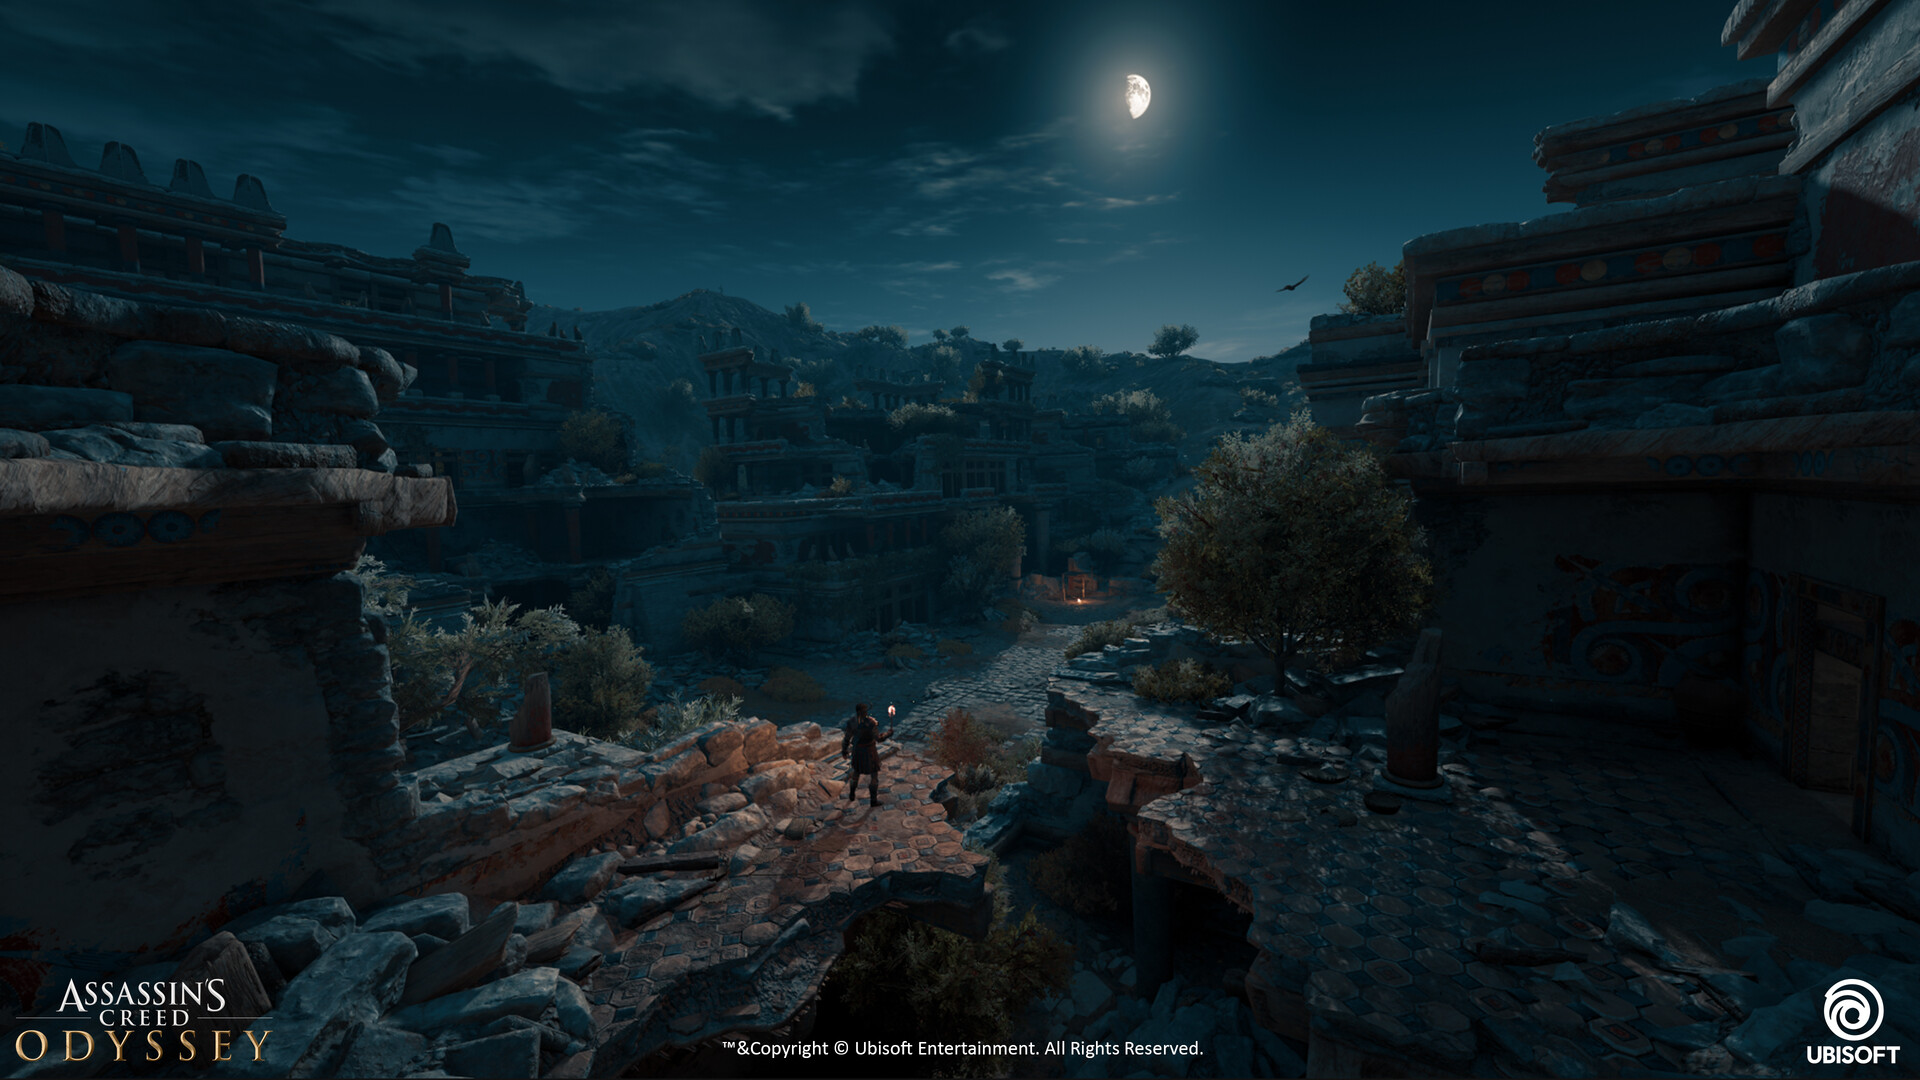 Assassin's Creed Odyssey Knossos Recognized Brands